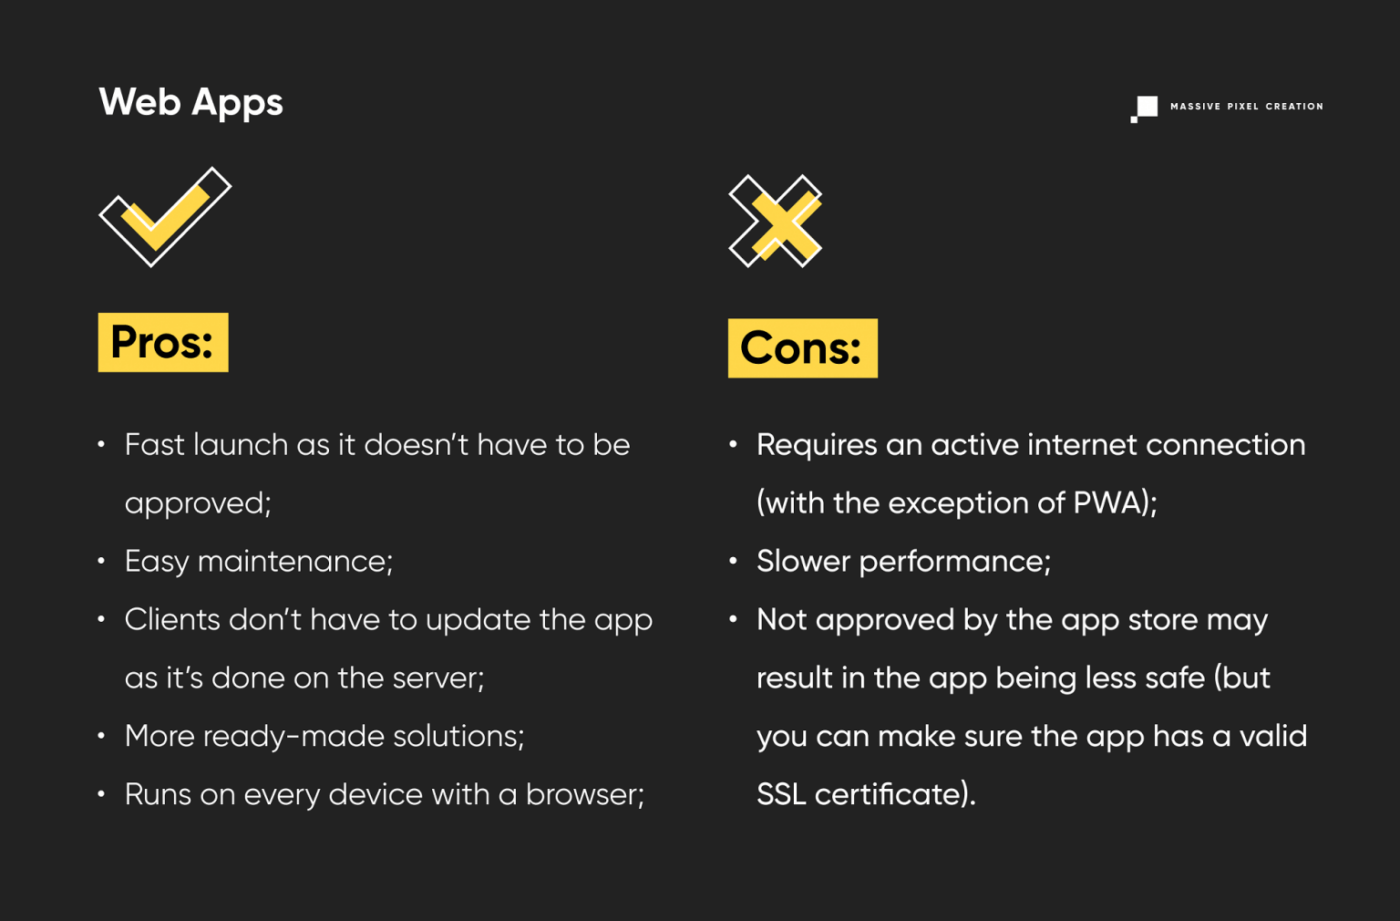 we app pros and cons